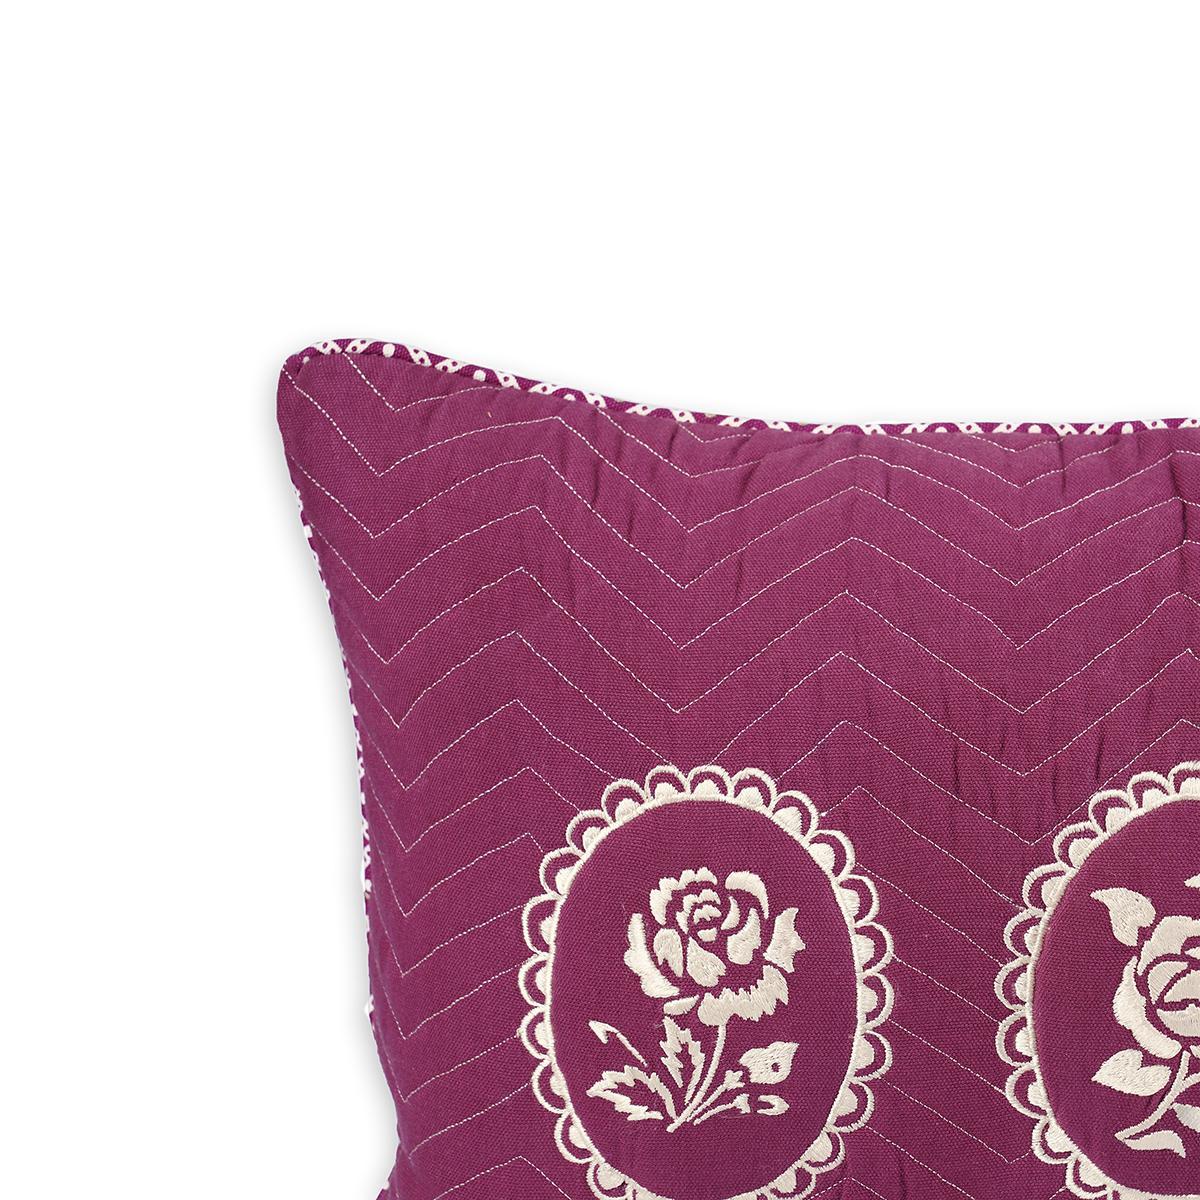 Plum/maroon DOMINOTERIE embroidered cotton pillow cover, sizes available